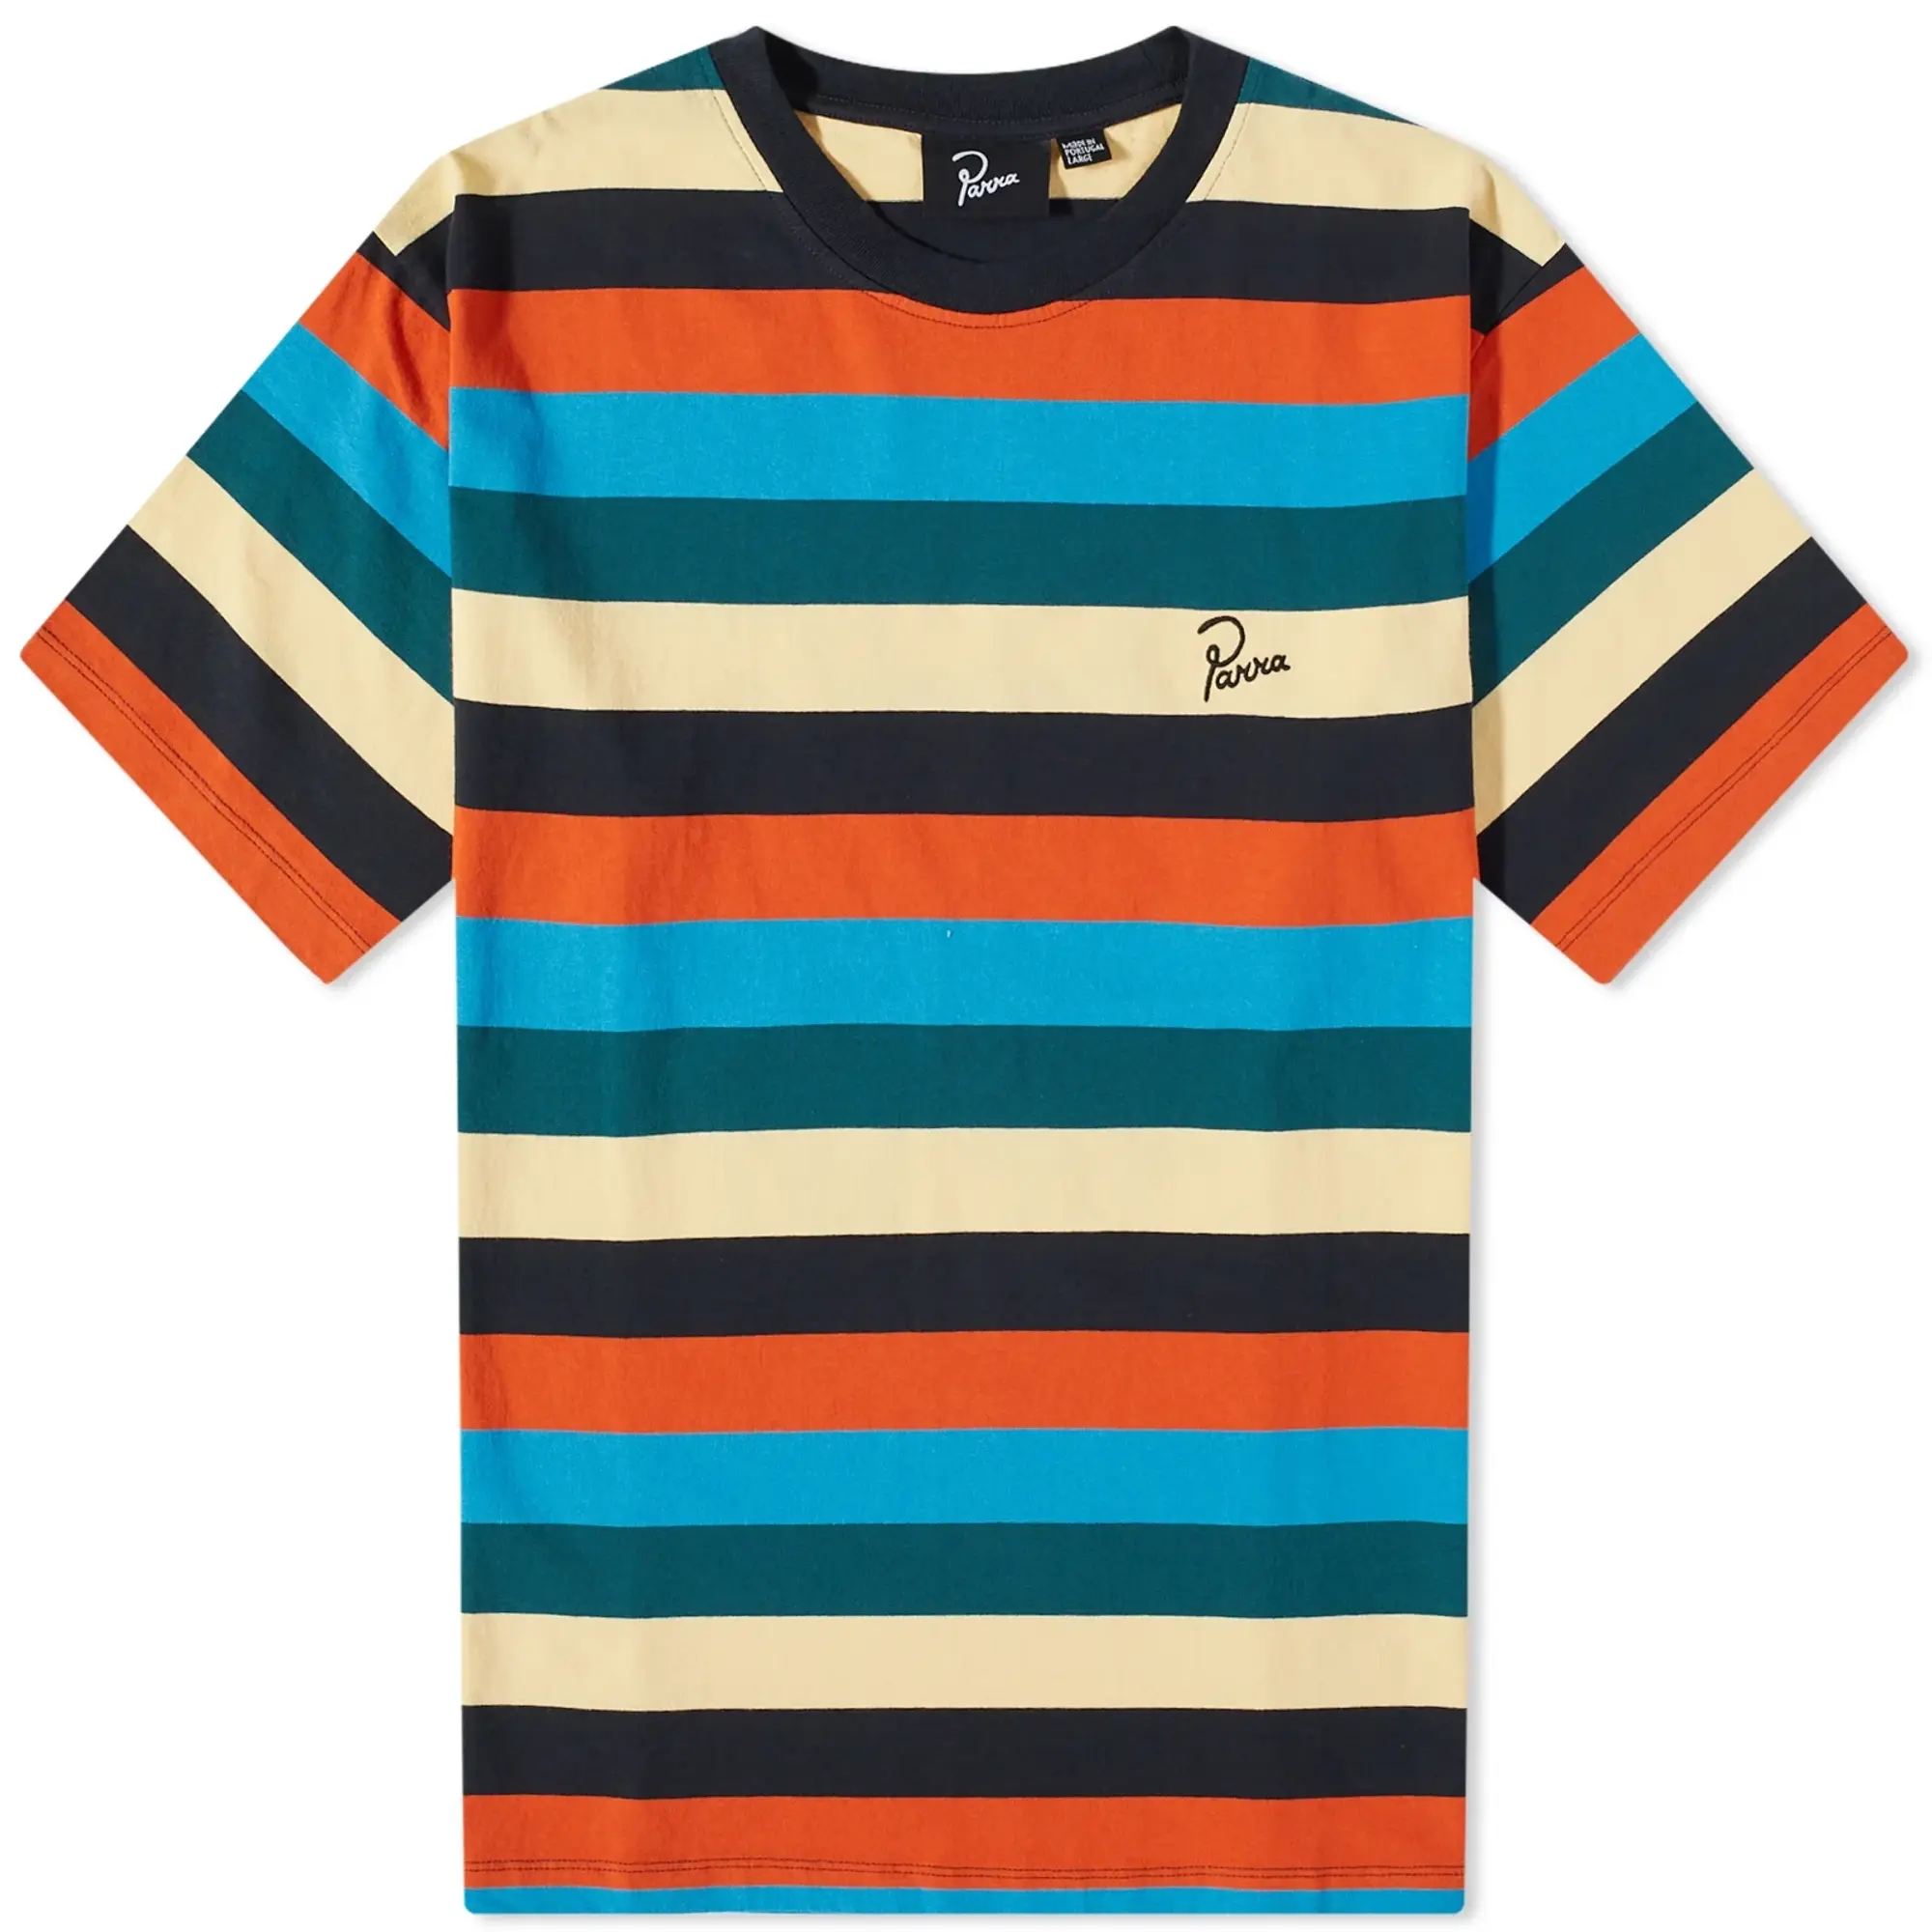 By Parra Men's Stacked Pets on Stripes T-Shirt Multi